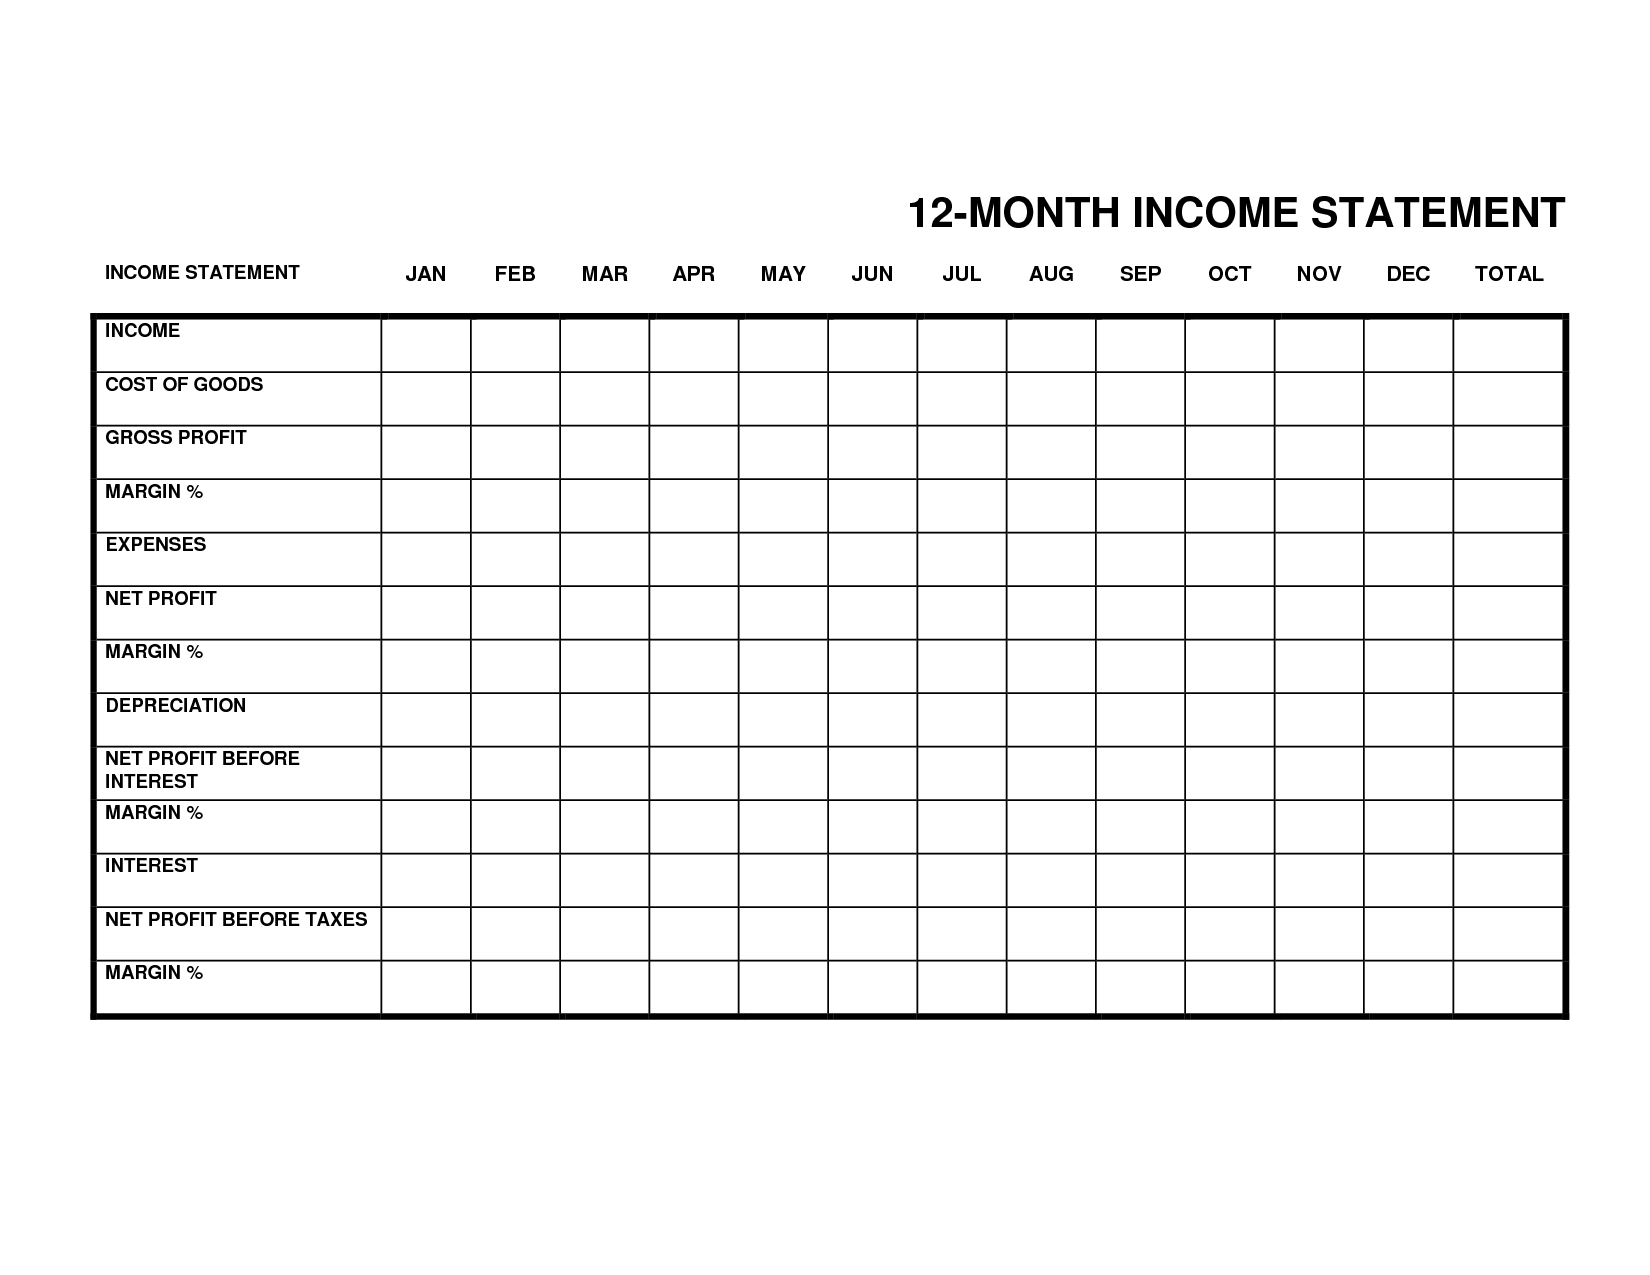 Monthly Income Statement Template Excel - Resourcesaver intended for Monthly Financial Statement Template Excel